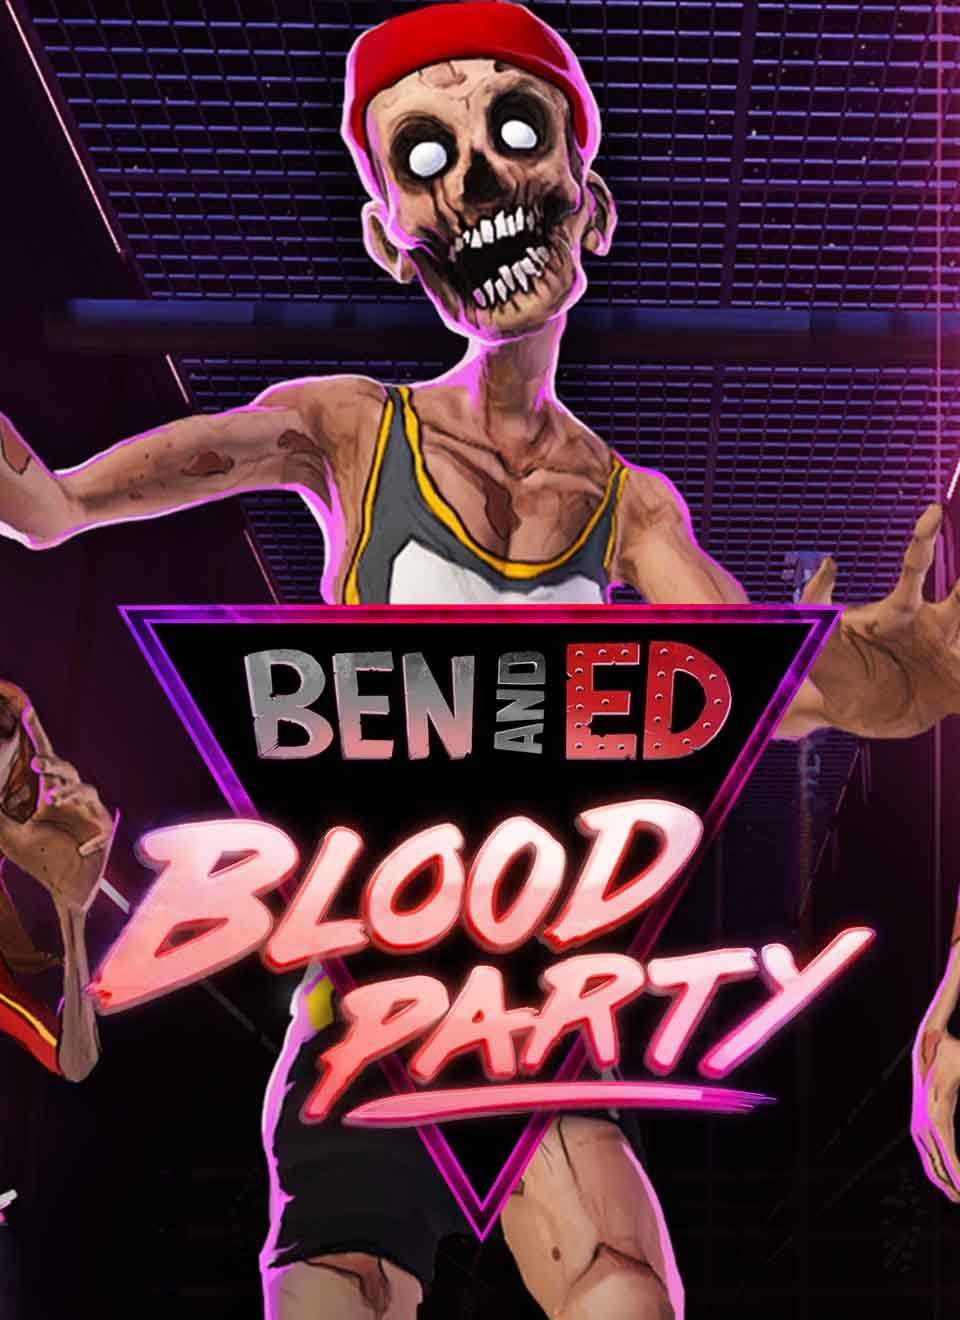 Ben and ed blood party